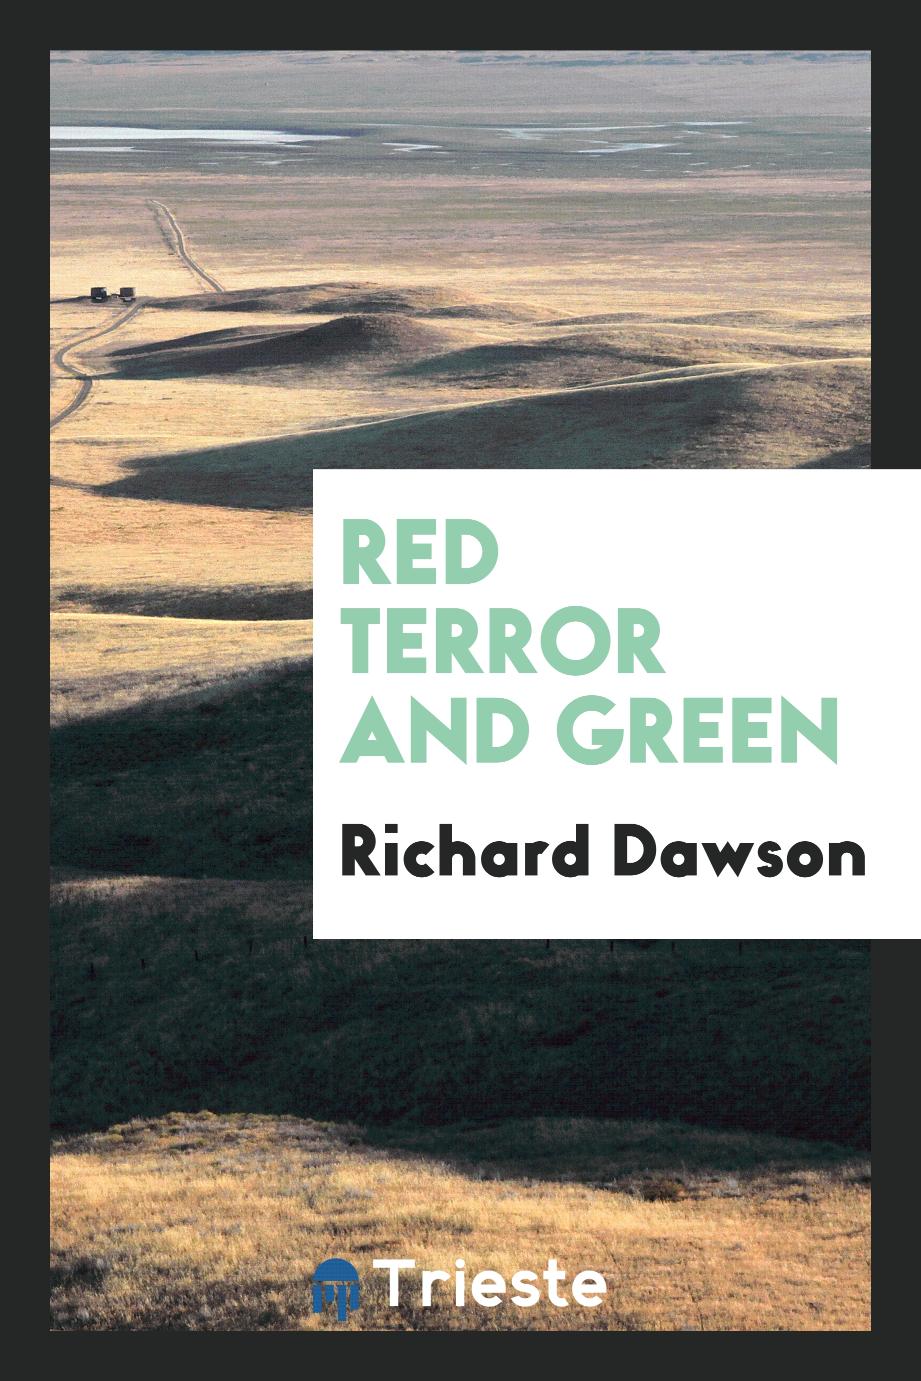 Red terror and green